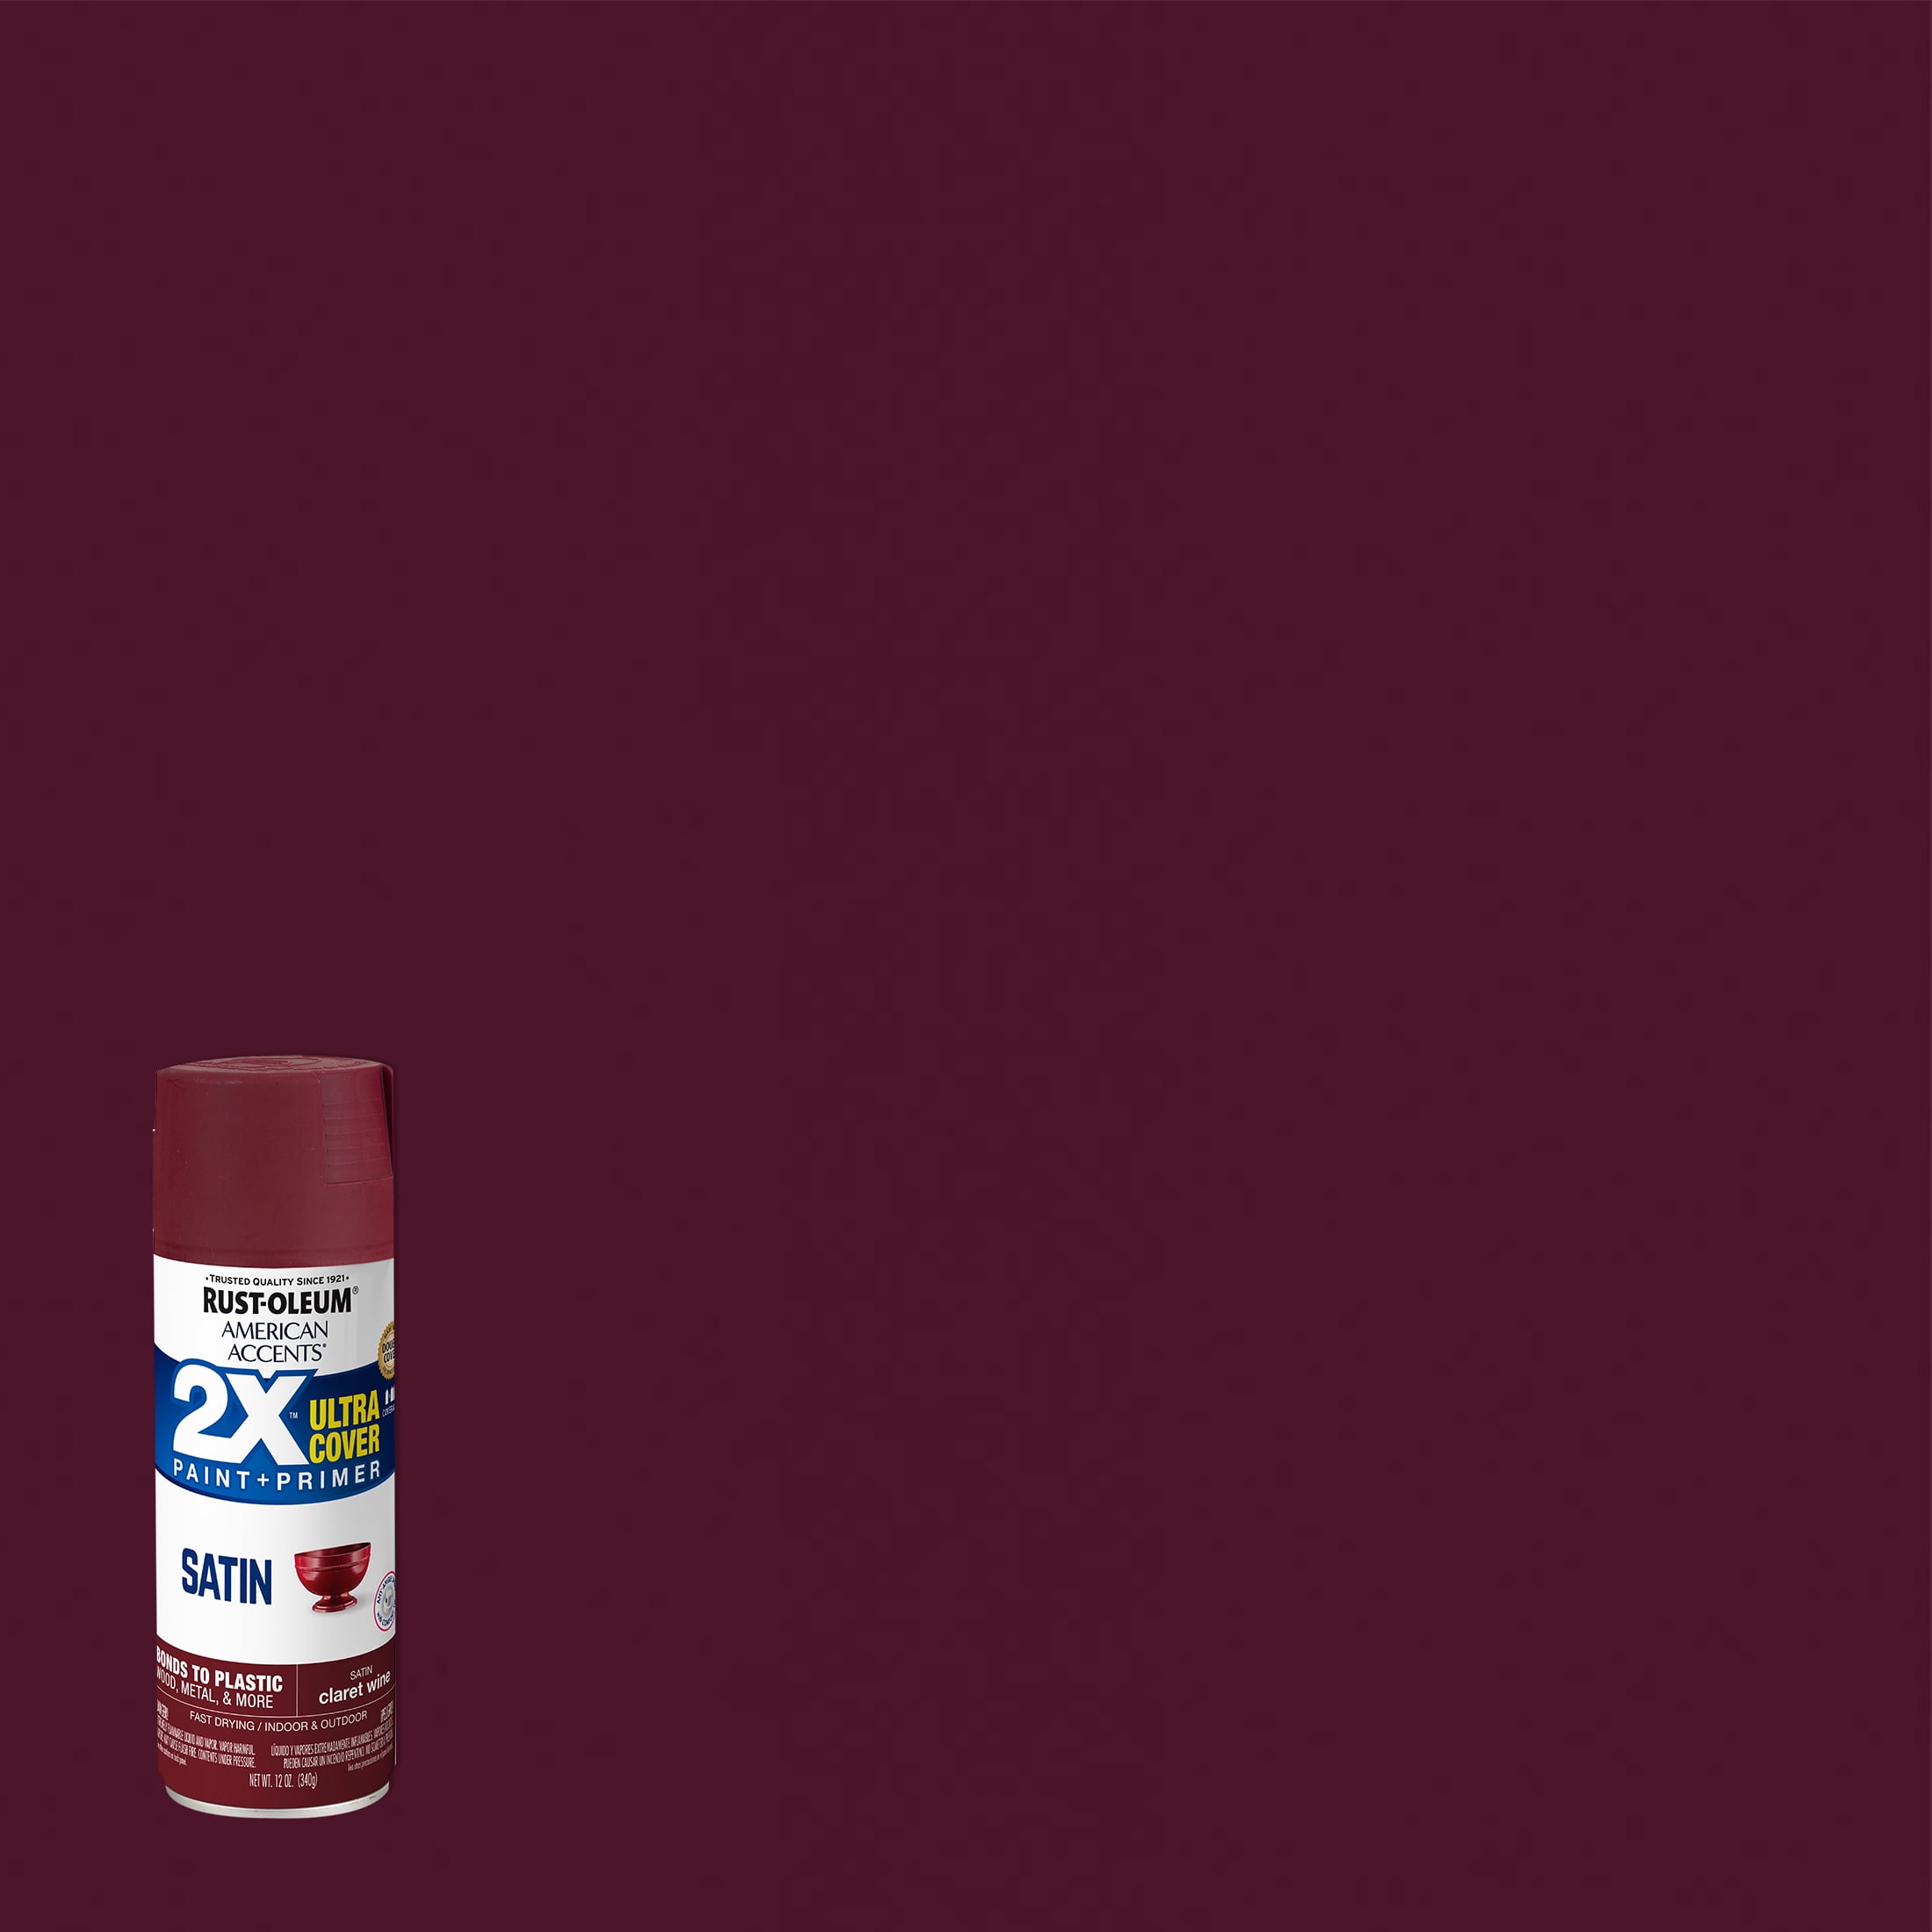 Claret Wine, Rust-Oleum American Accents 2X Ultra Cover Satin Spray Paint- 12 oz